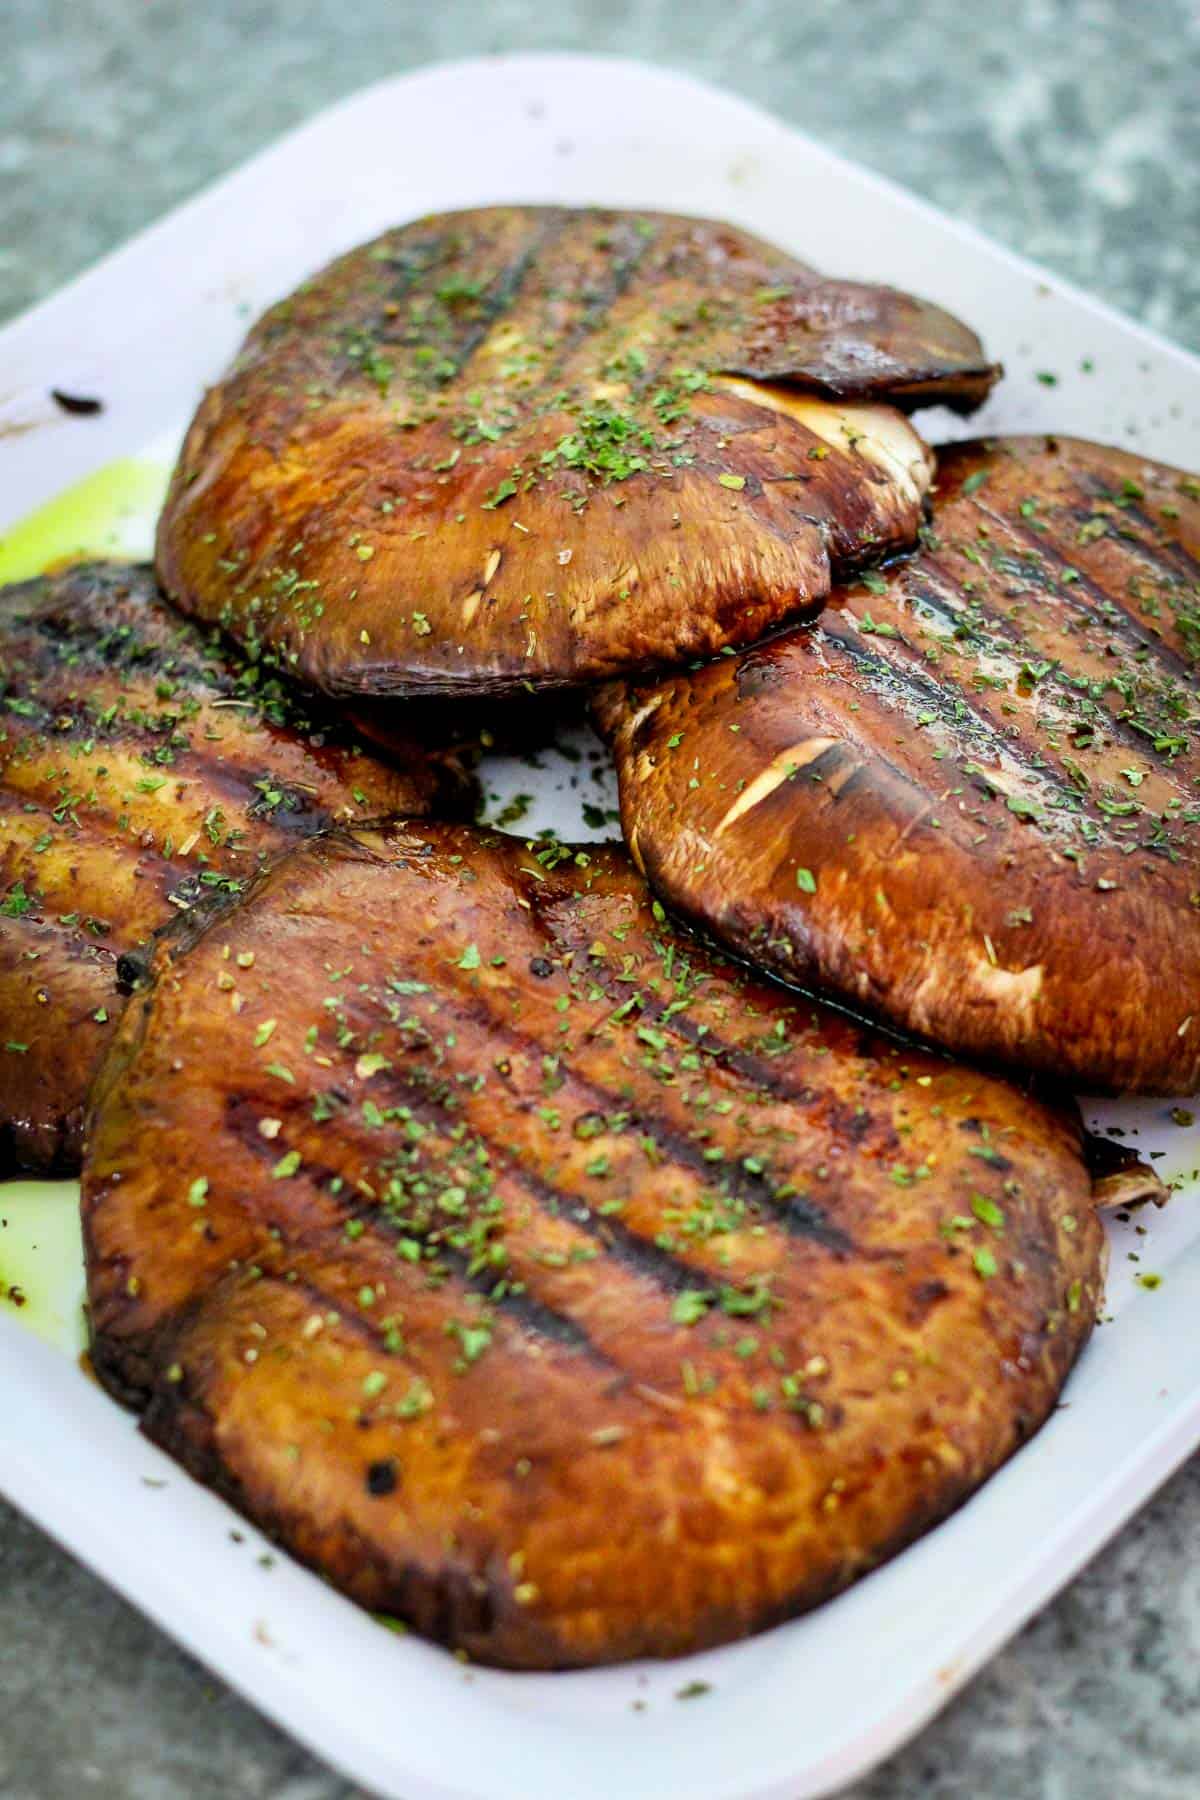 Four grilled portobello mushrooms on a platter. They look garnished with green herbs.